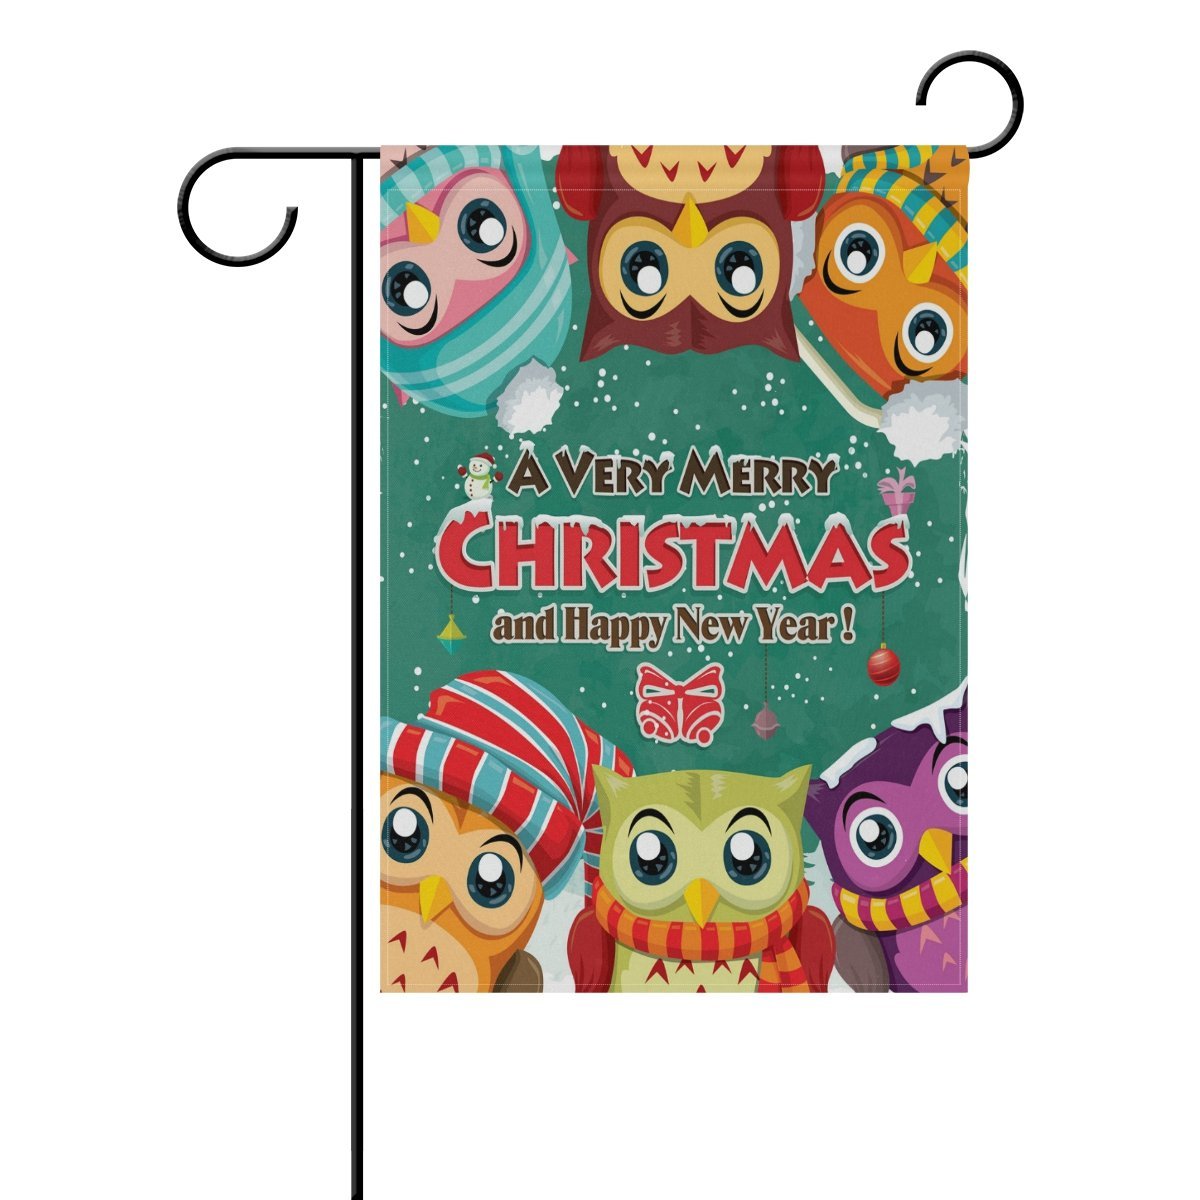 POPCreation Vintage Christmas Poster Design With Owls Polyester Garden Flag Outdoor Flag Home Party Garden Decor 28x40 inches - image 1 of 2